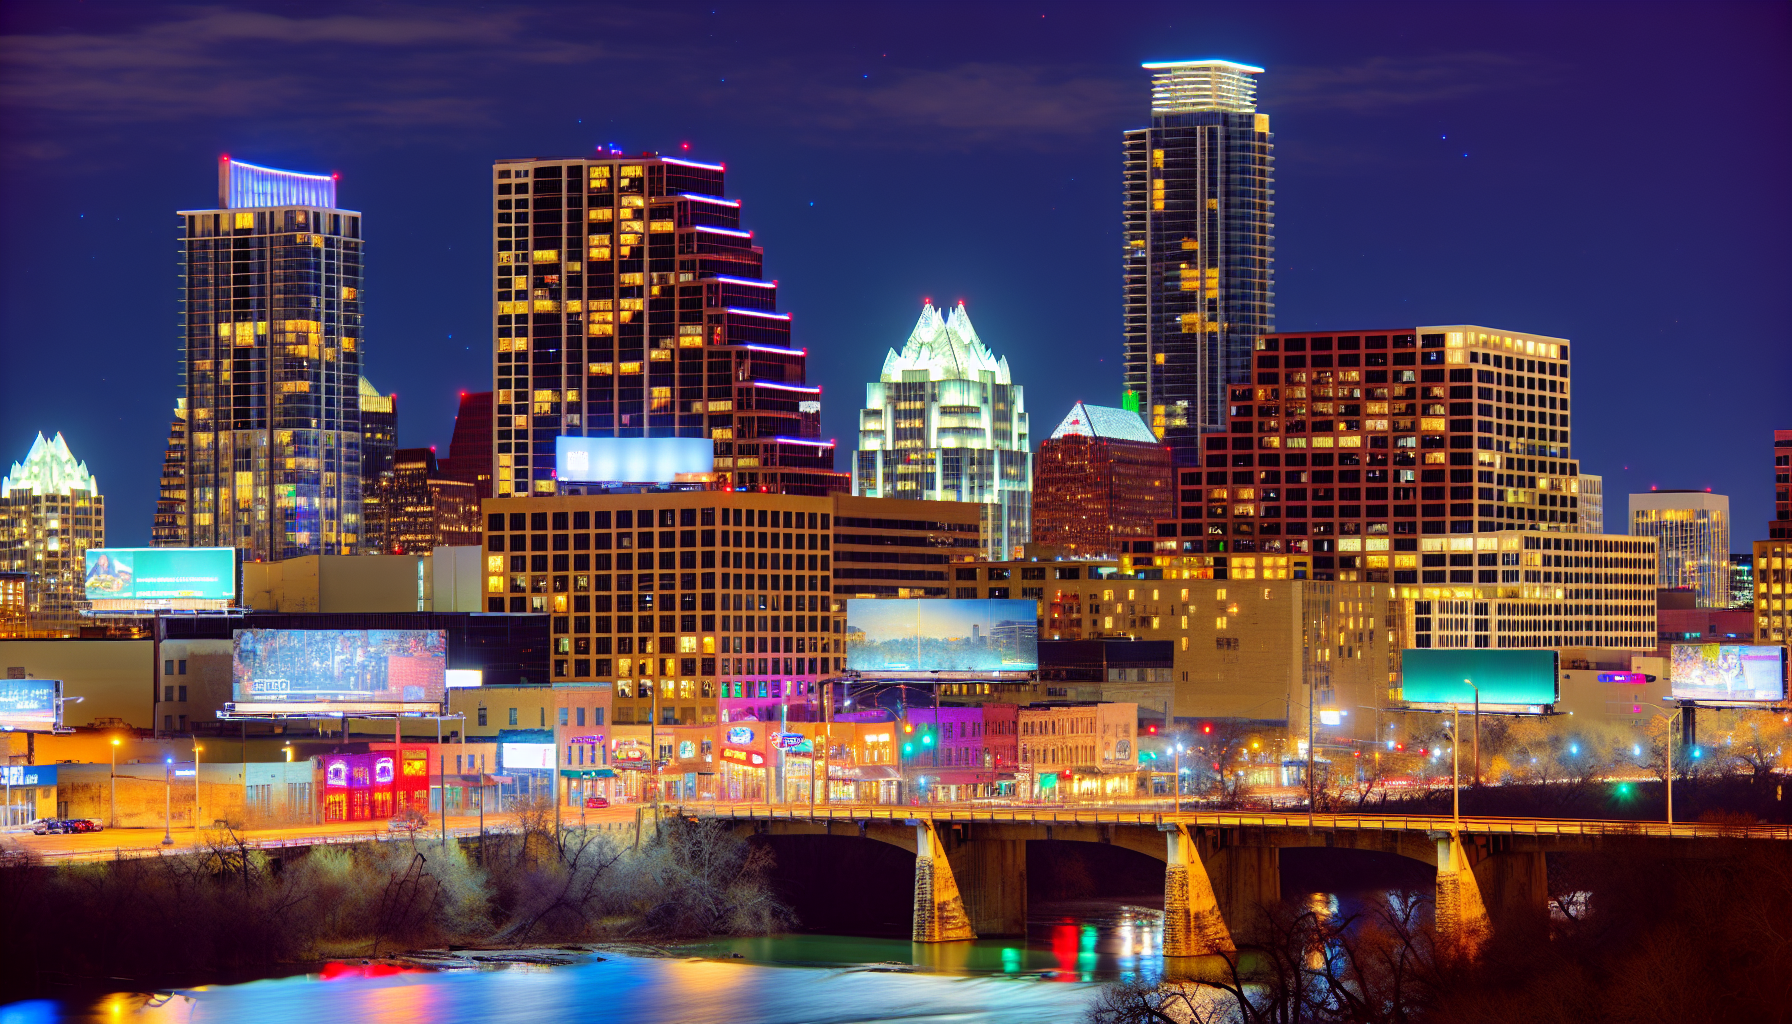 City skyline at night in downtown Austin, Texas